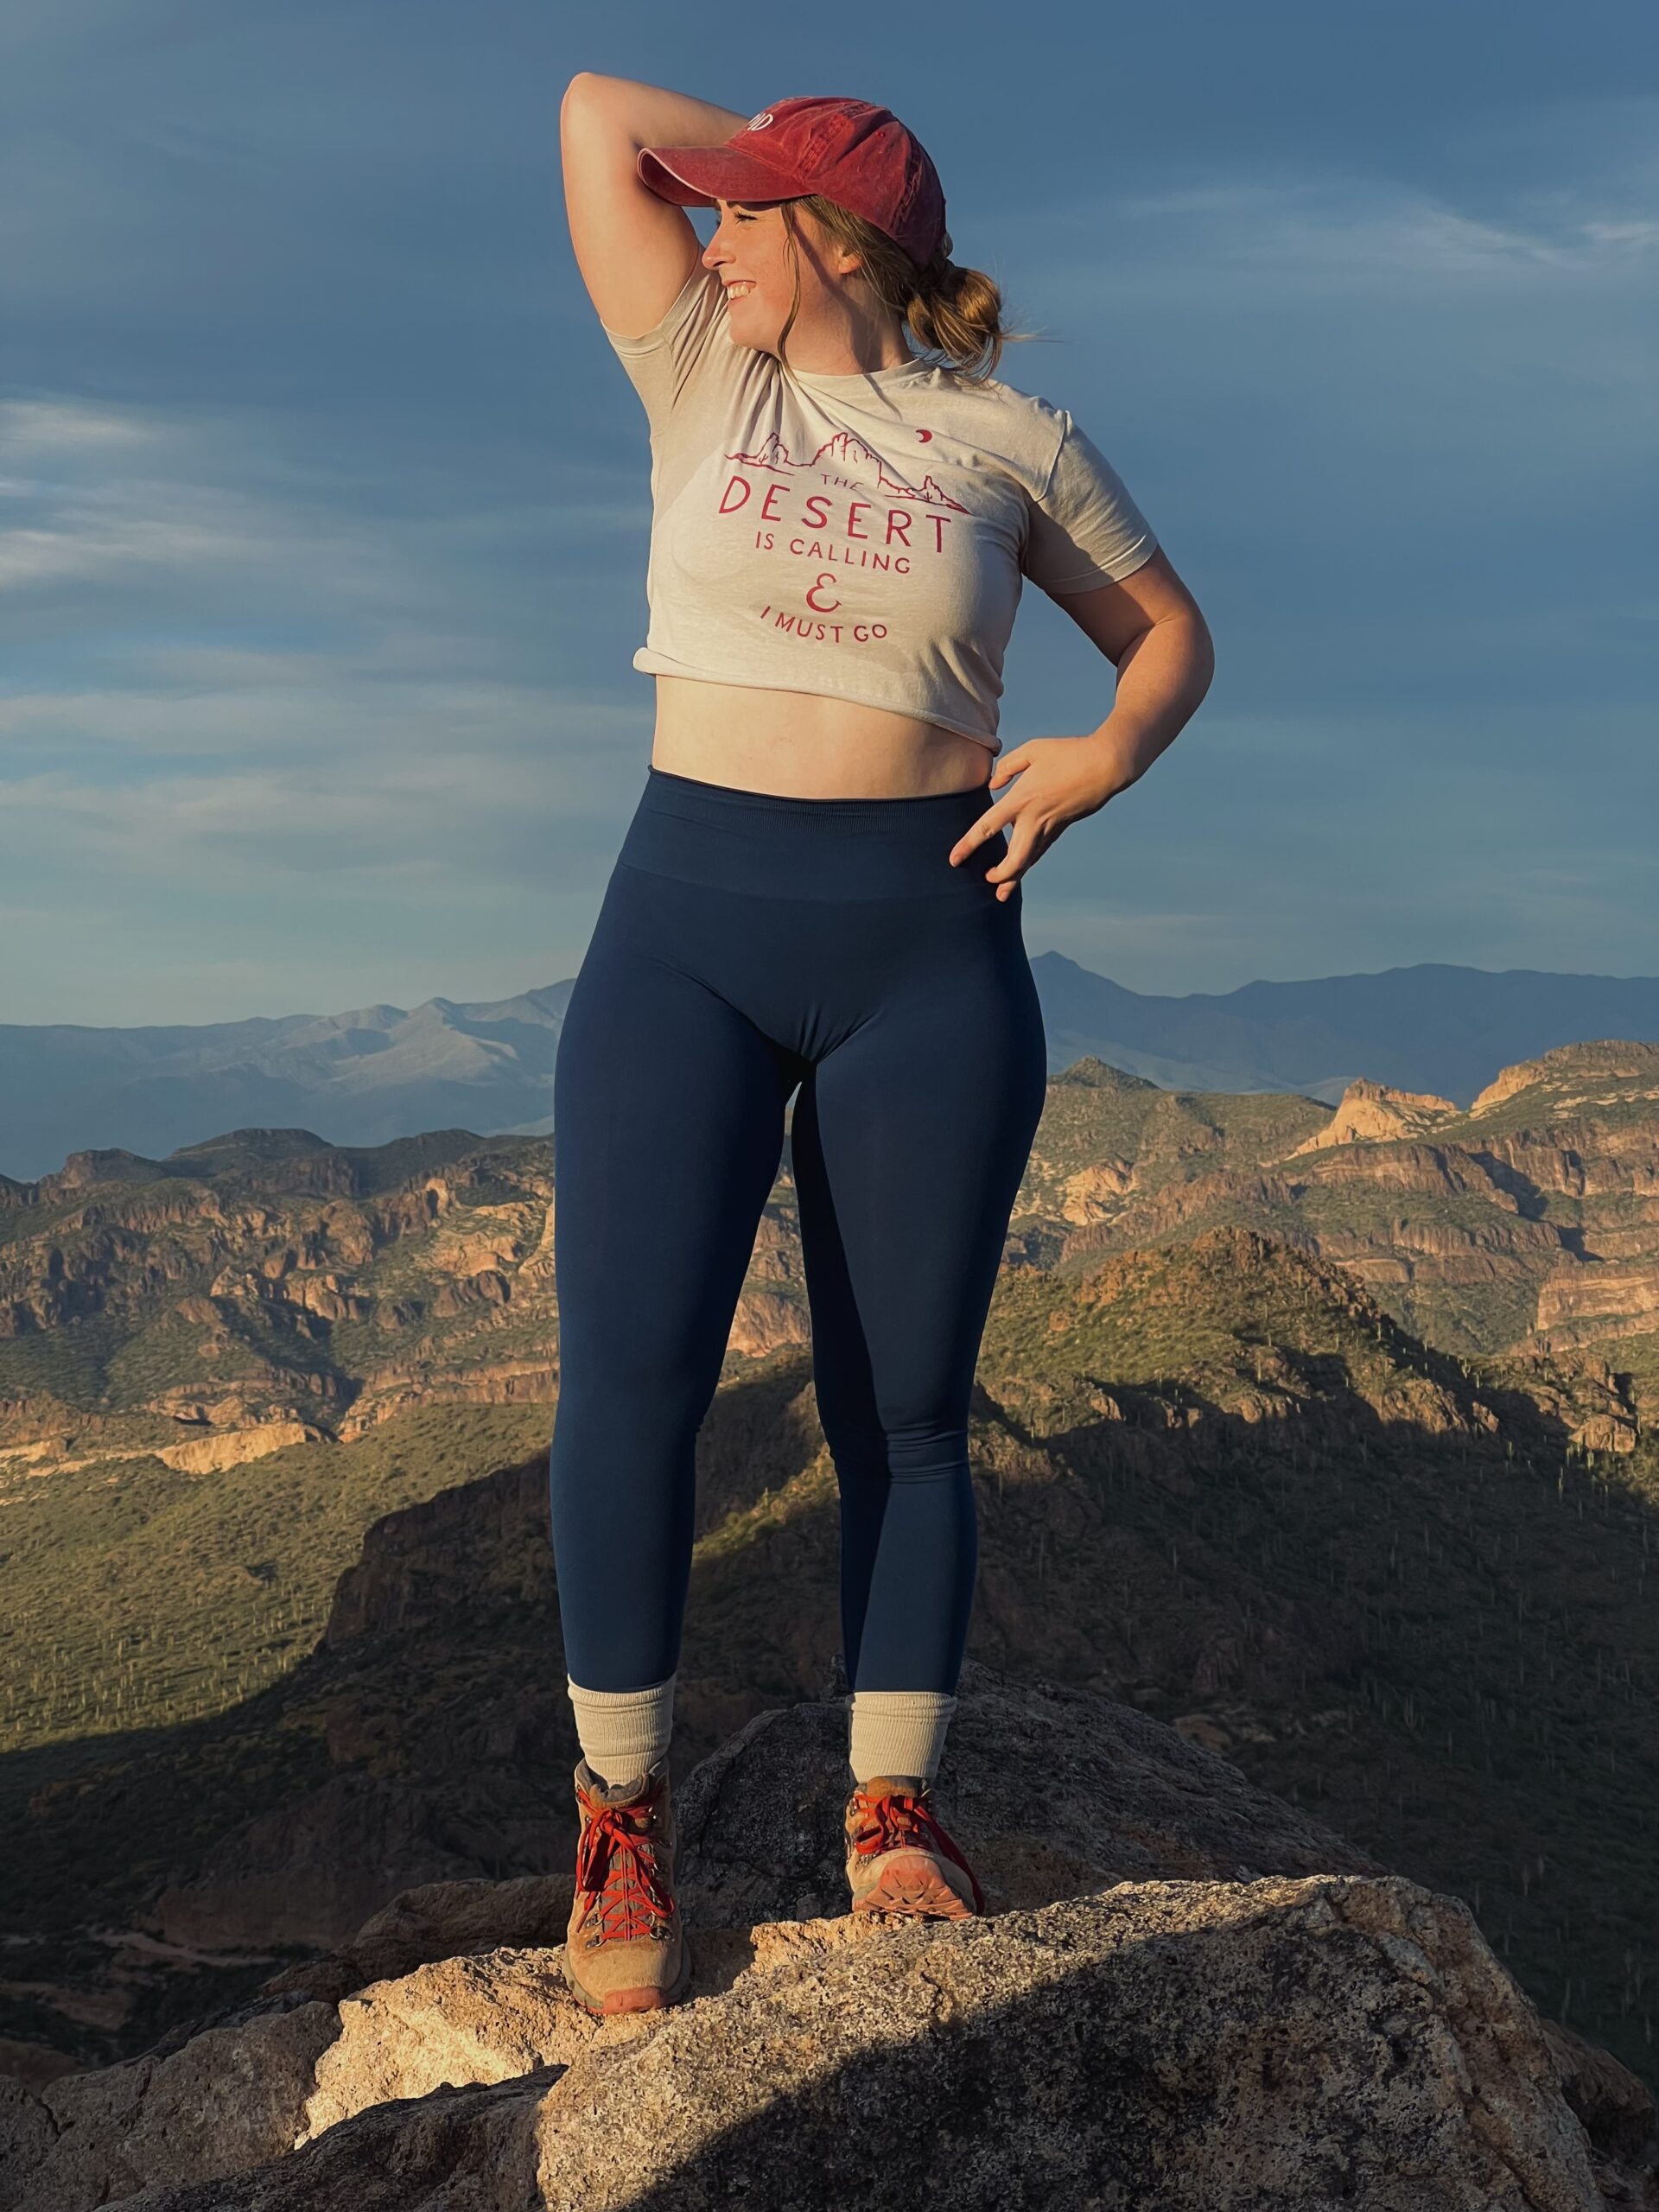 girl with white shirt and blue pants on a mountain